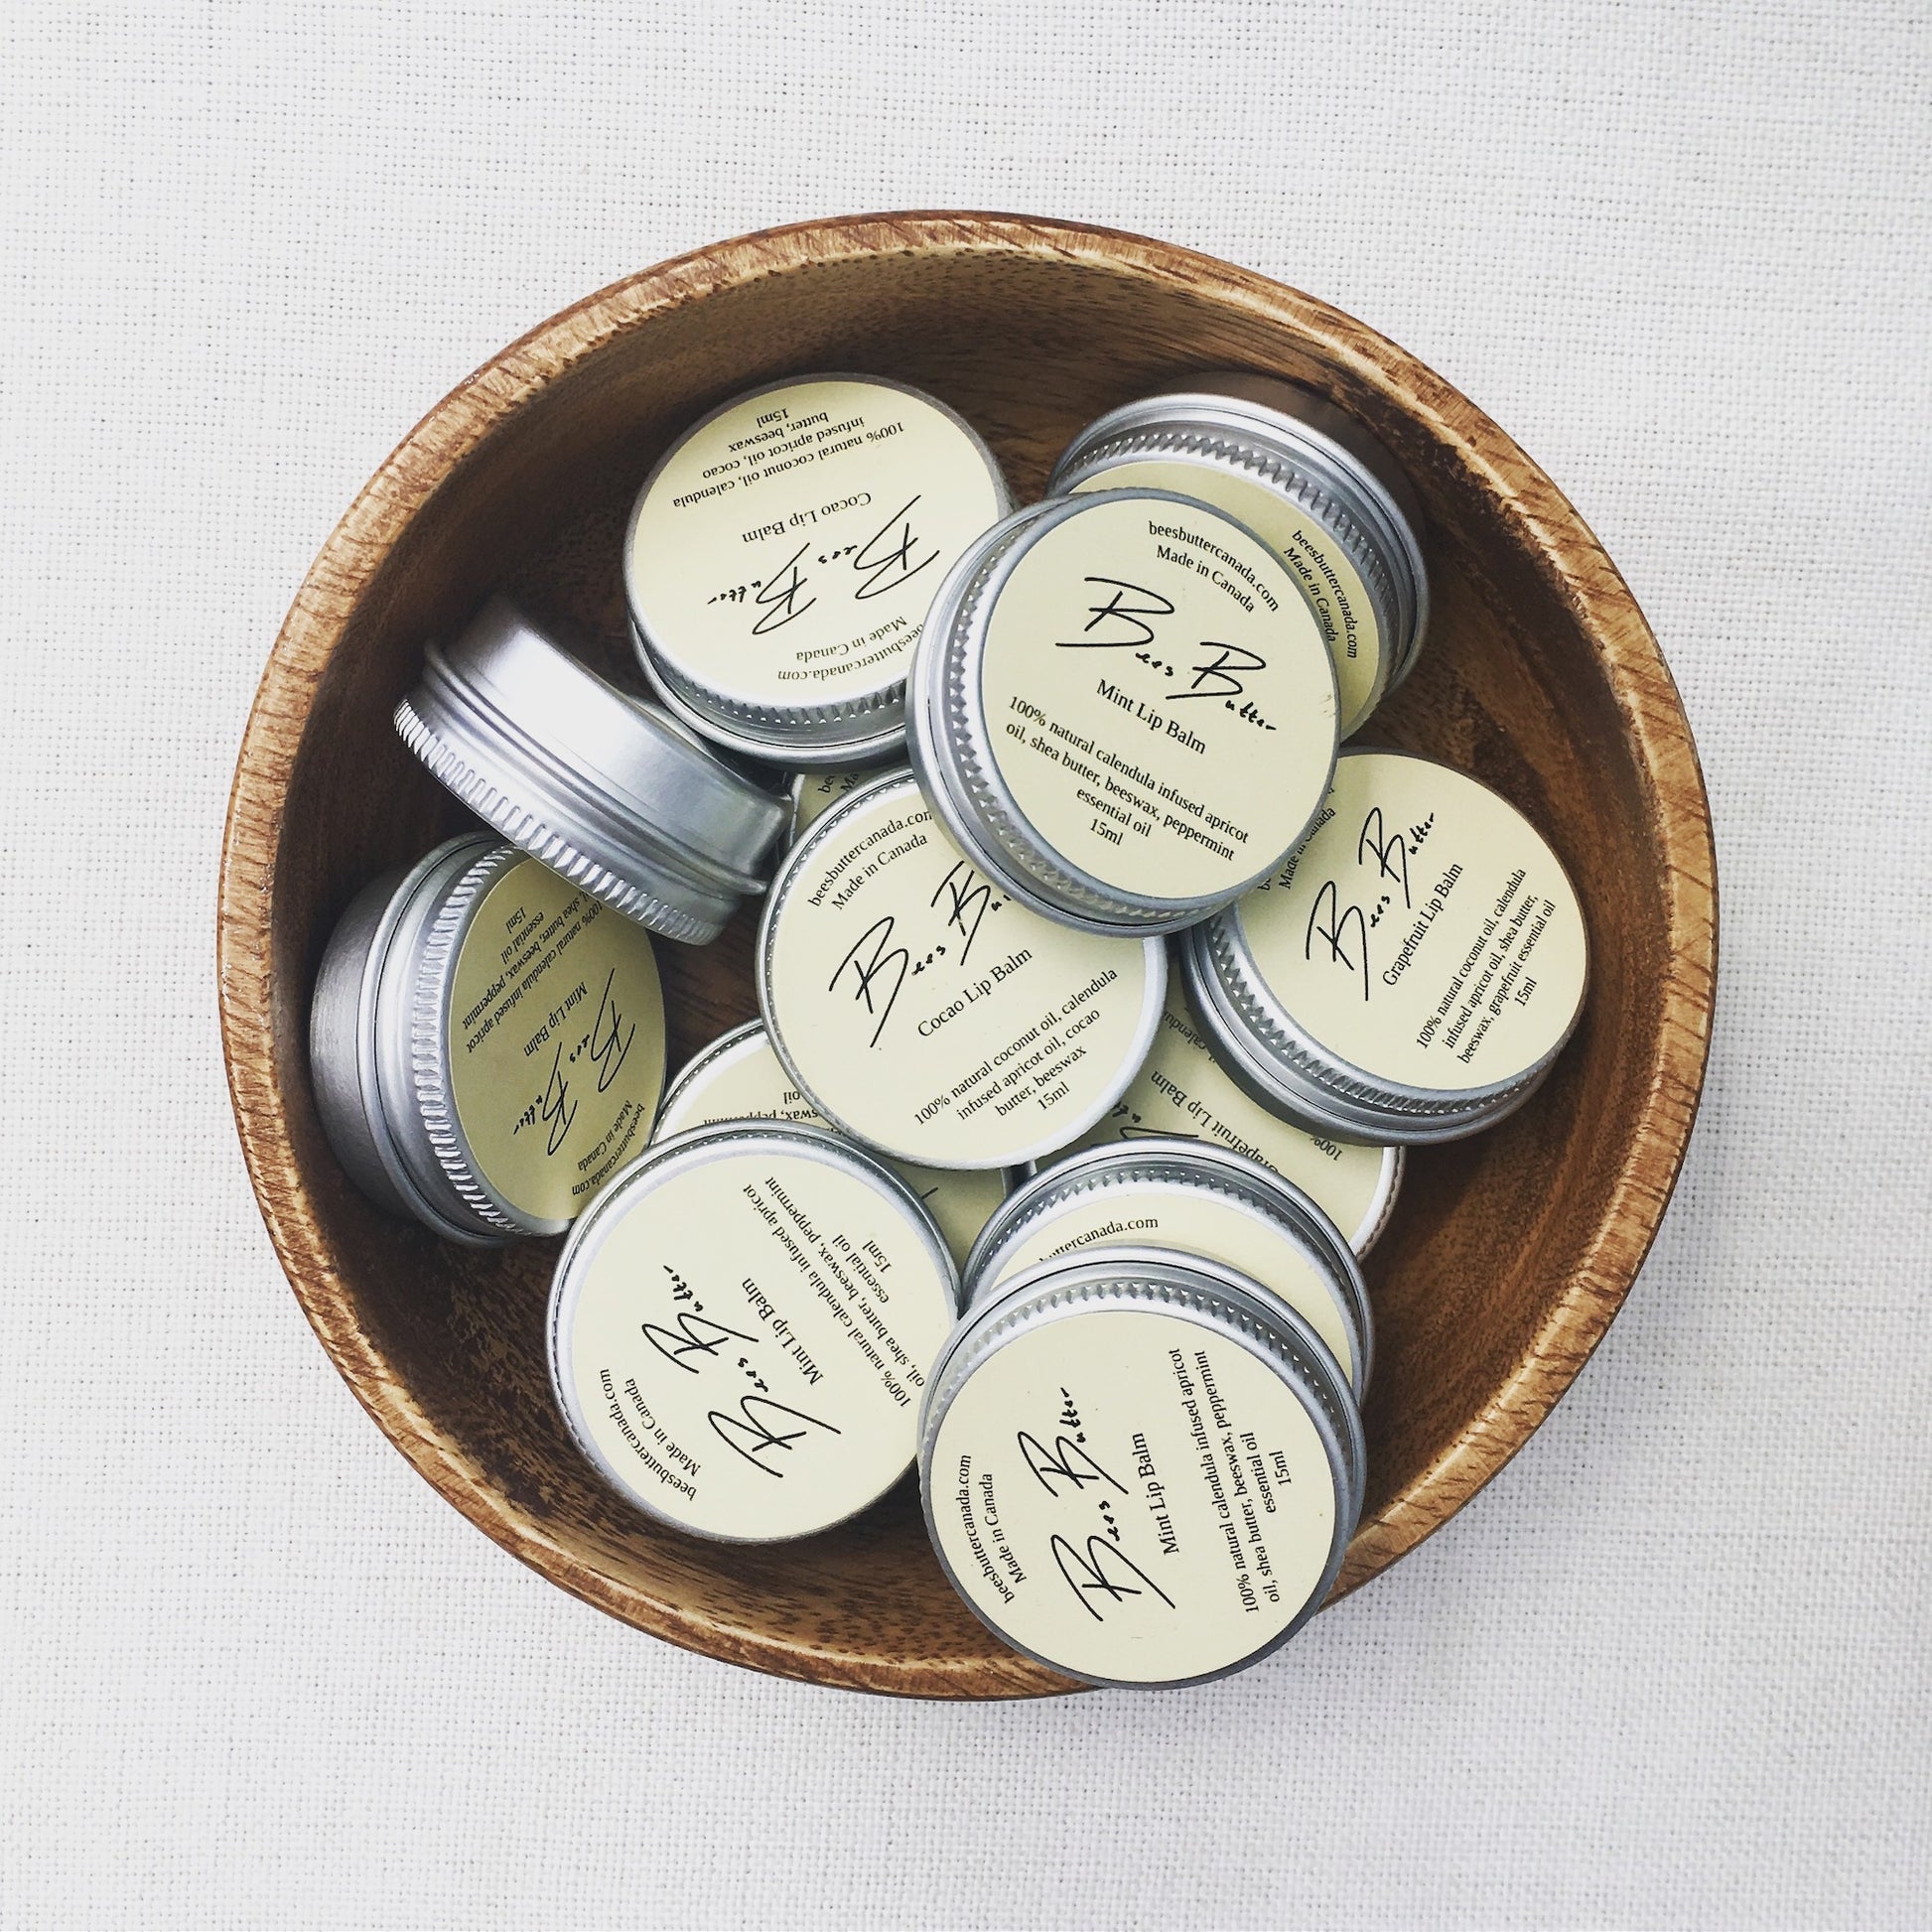 lips balms for wholesale